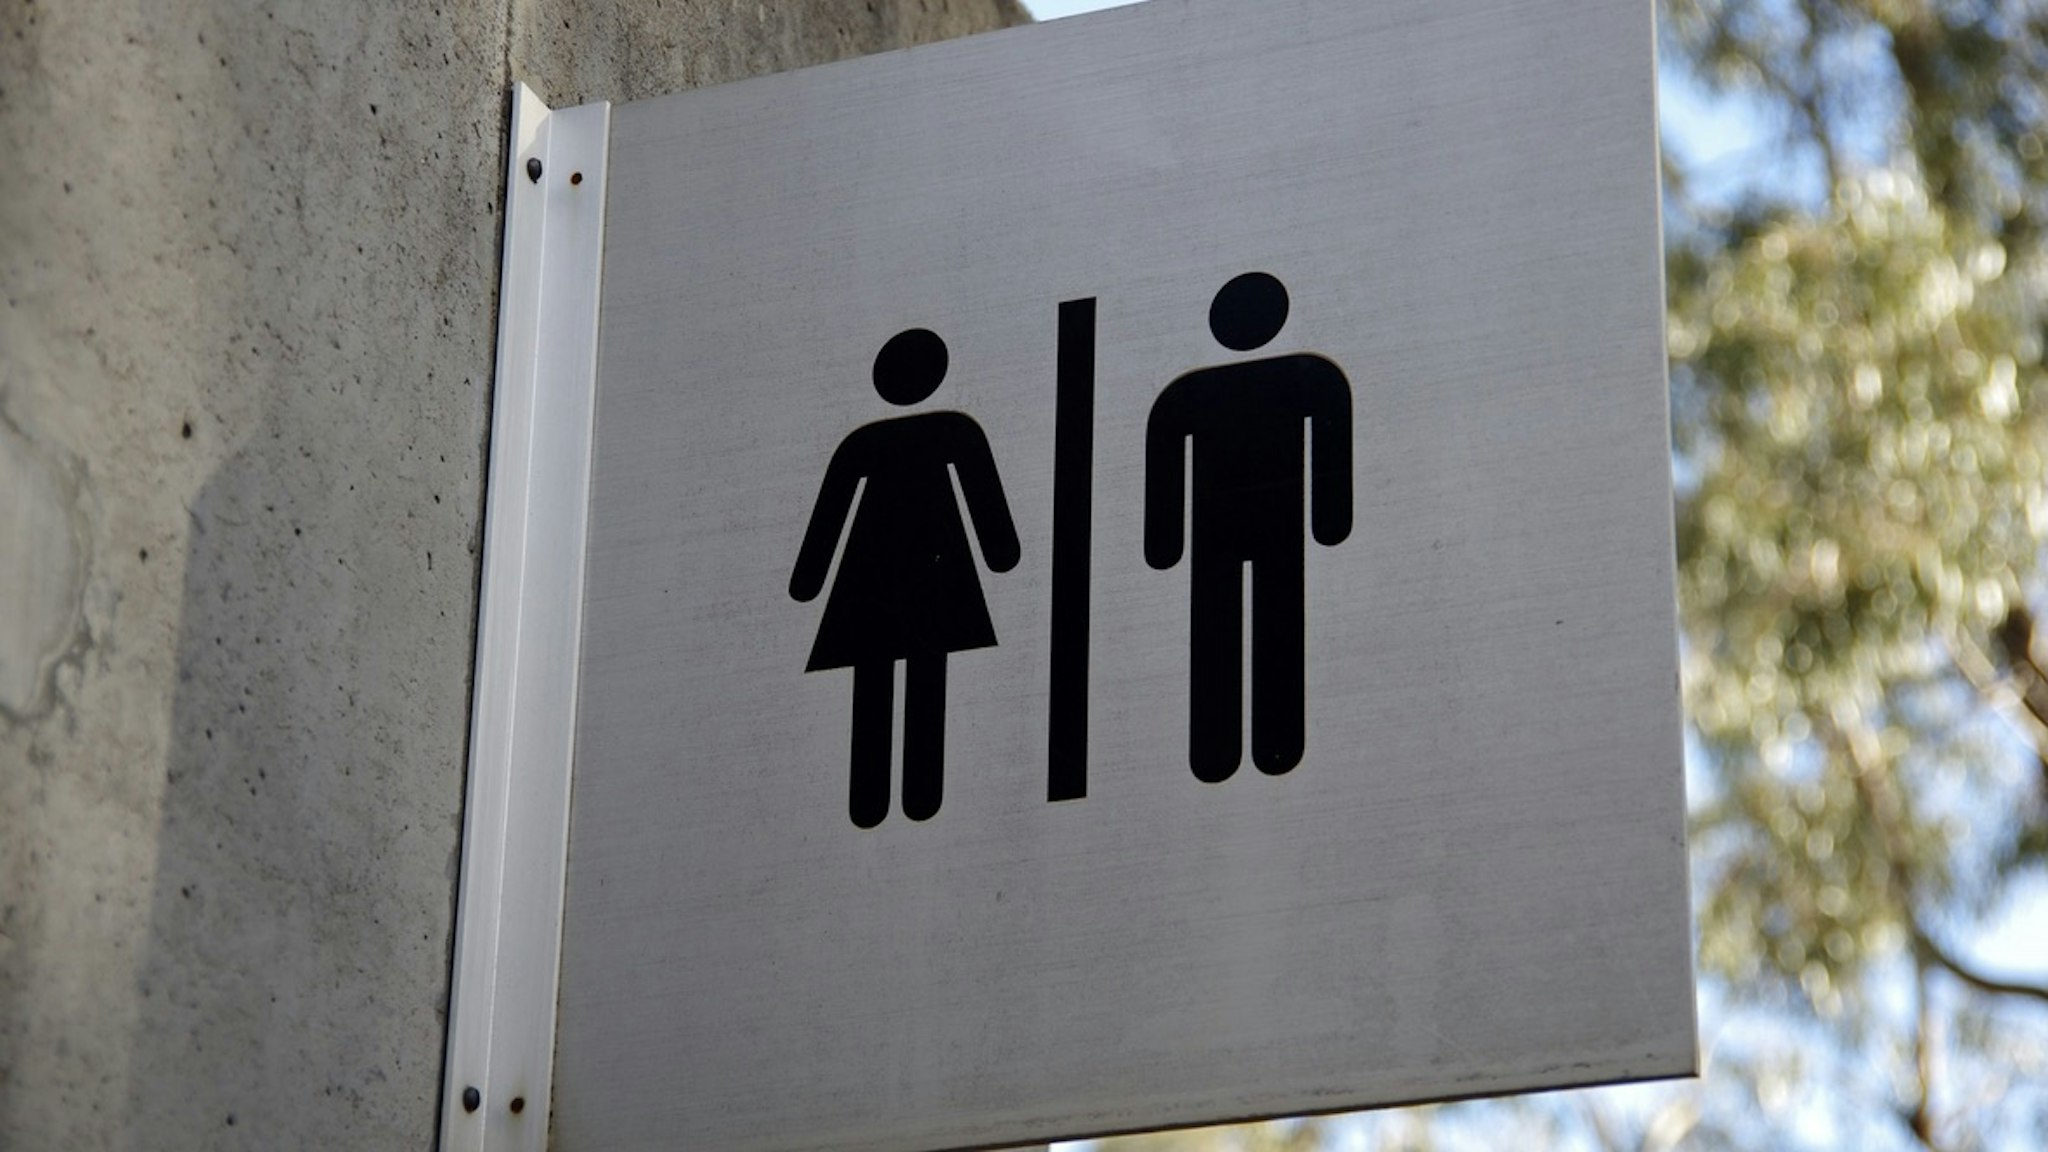 Female and male toilet sign on the exterior of a public restroom block - stock photo Simon McGill via Getty Images